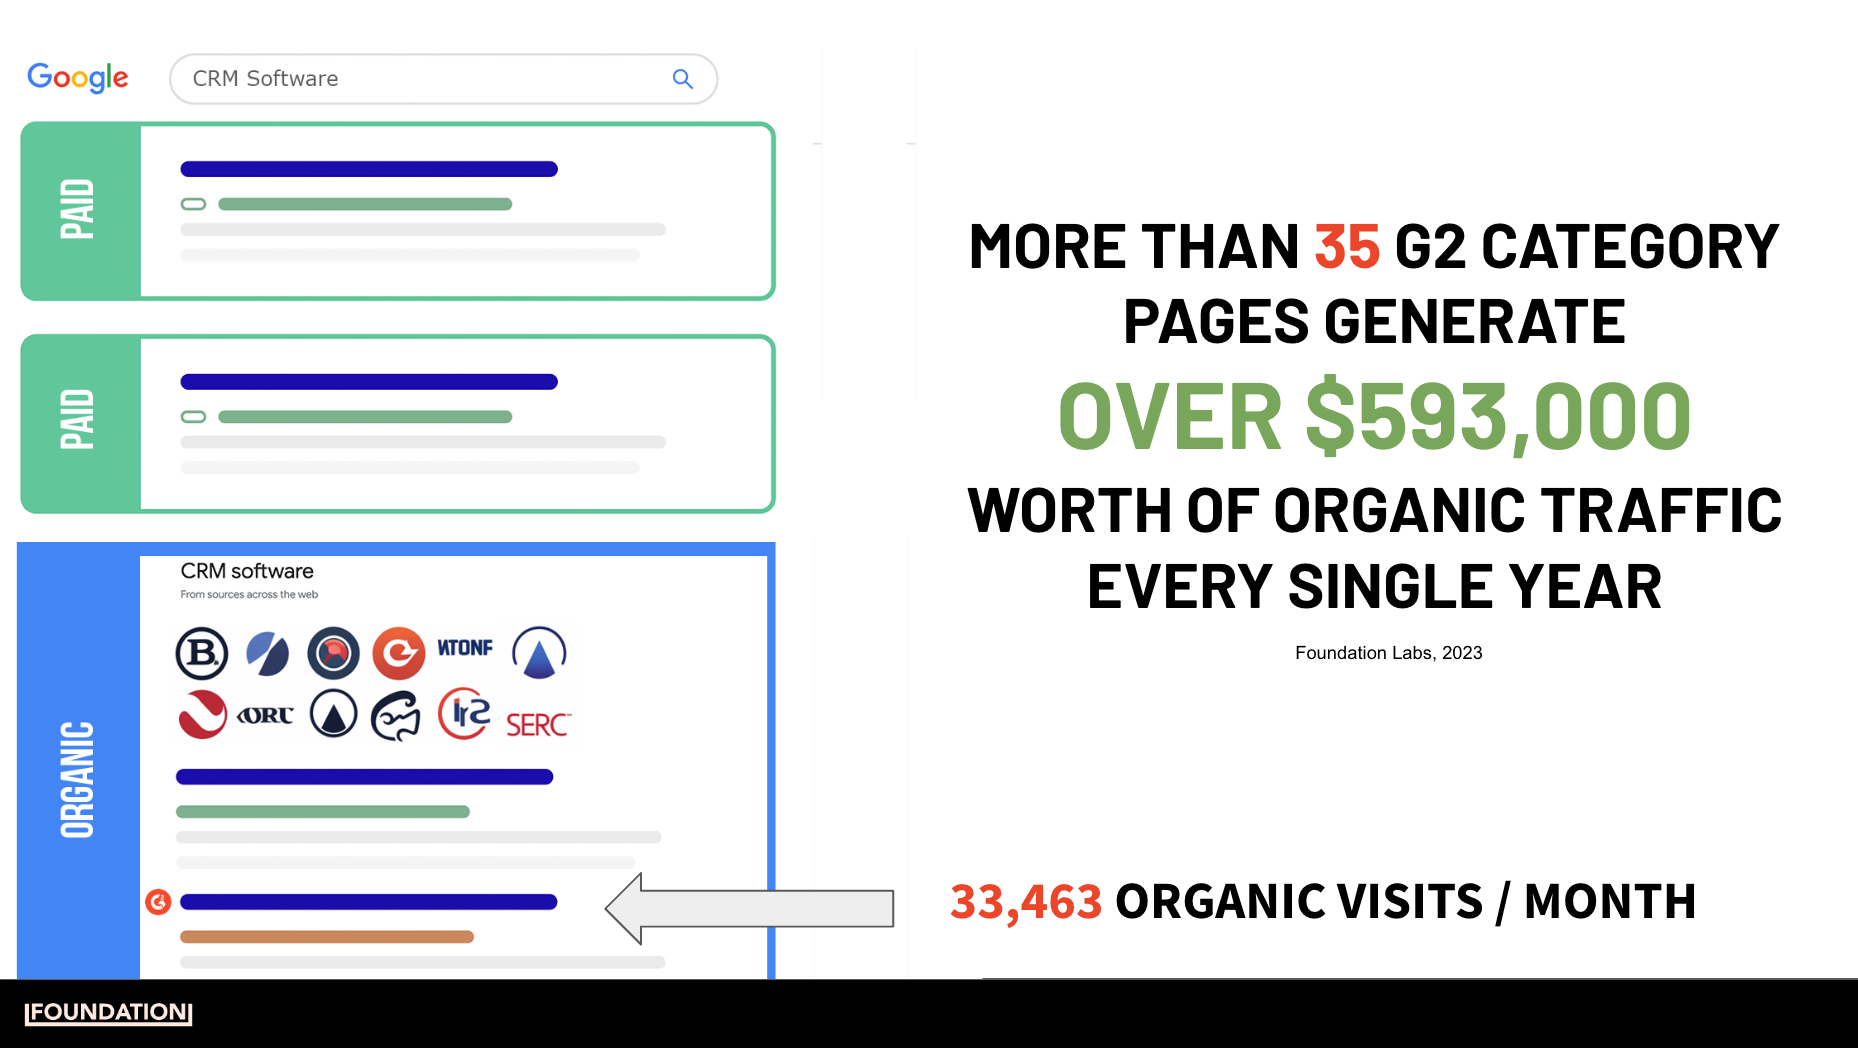 Image with the text "More than 35 G2 category pages generate over $593,000 worth of organic traffic every single year" and an arrow pointing to 33,463 organic visits per month